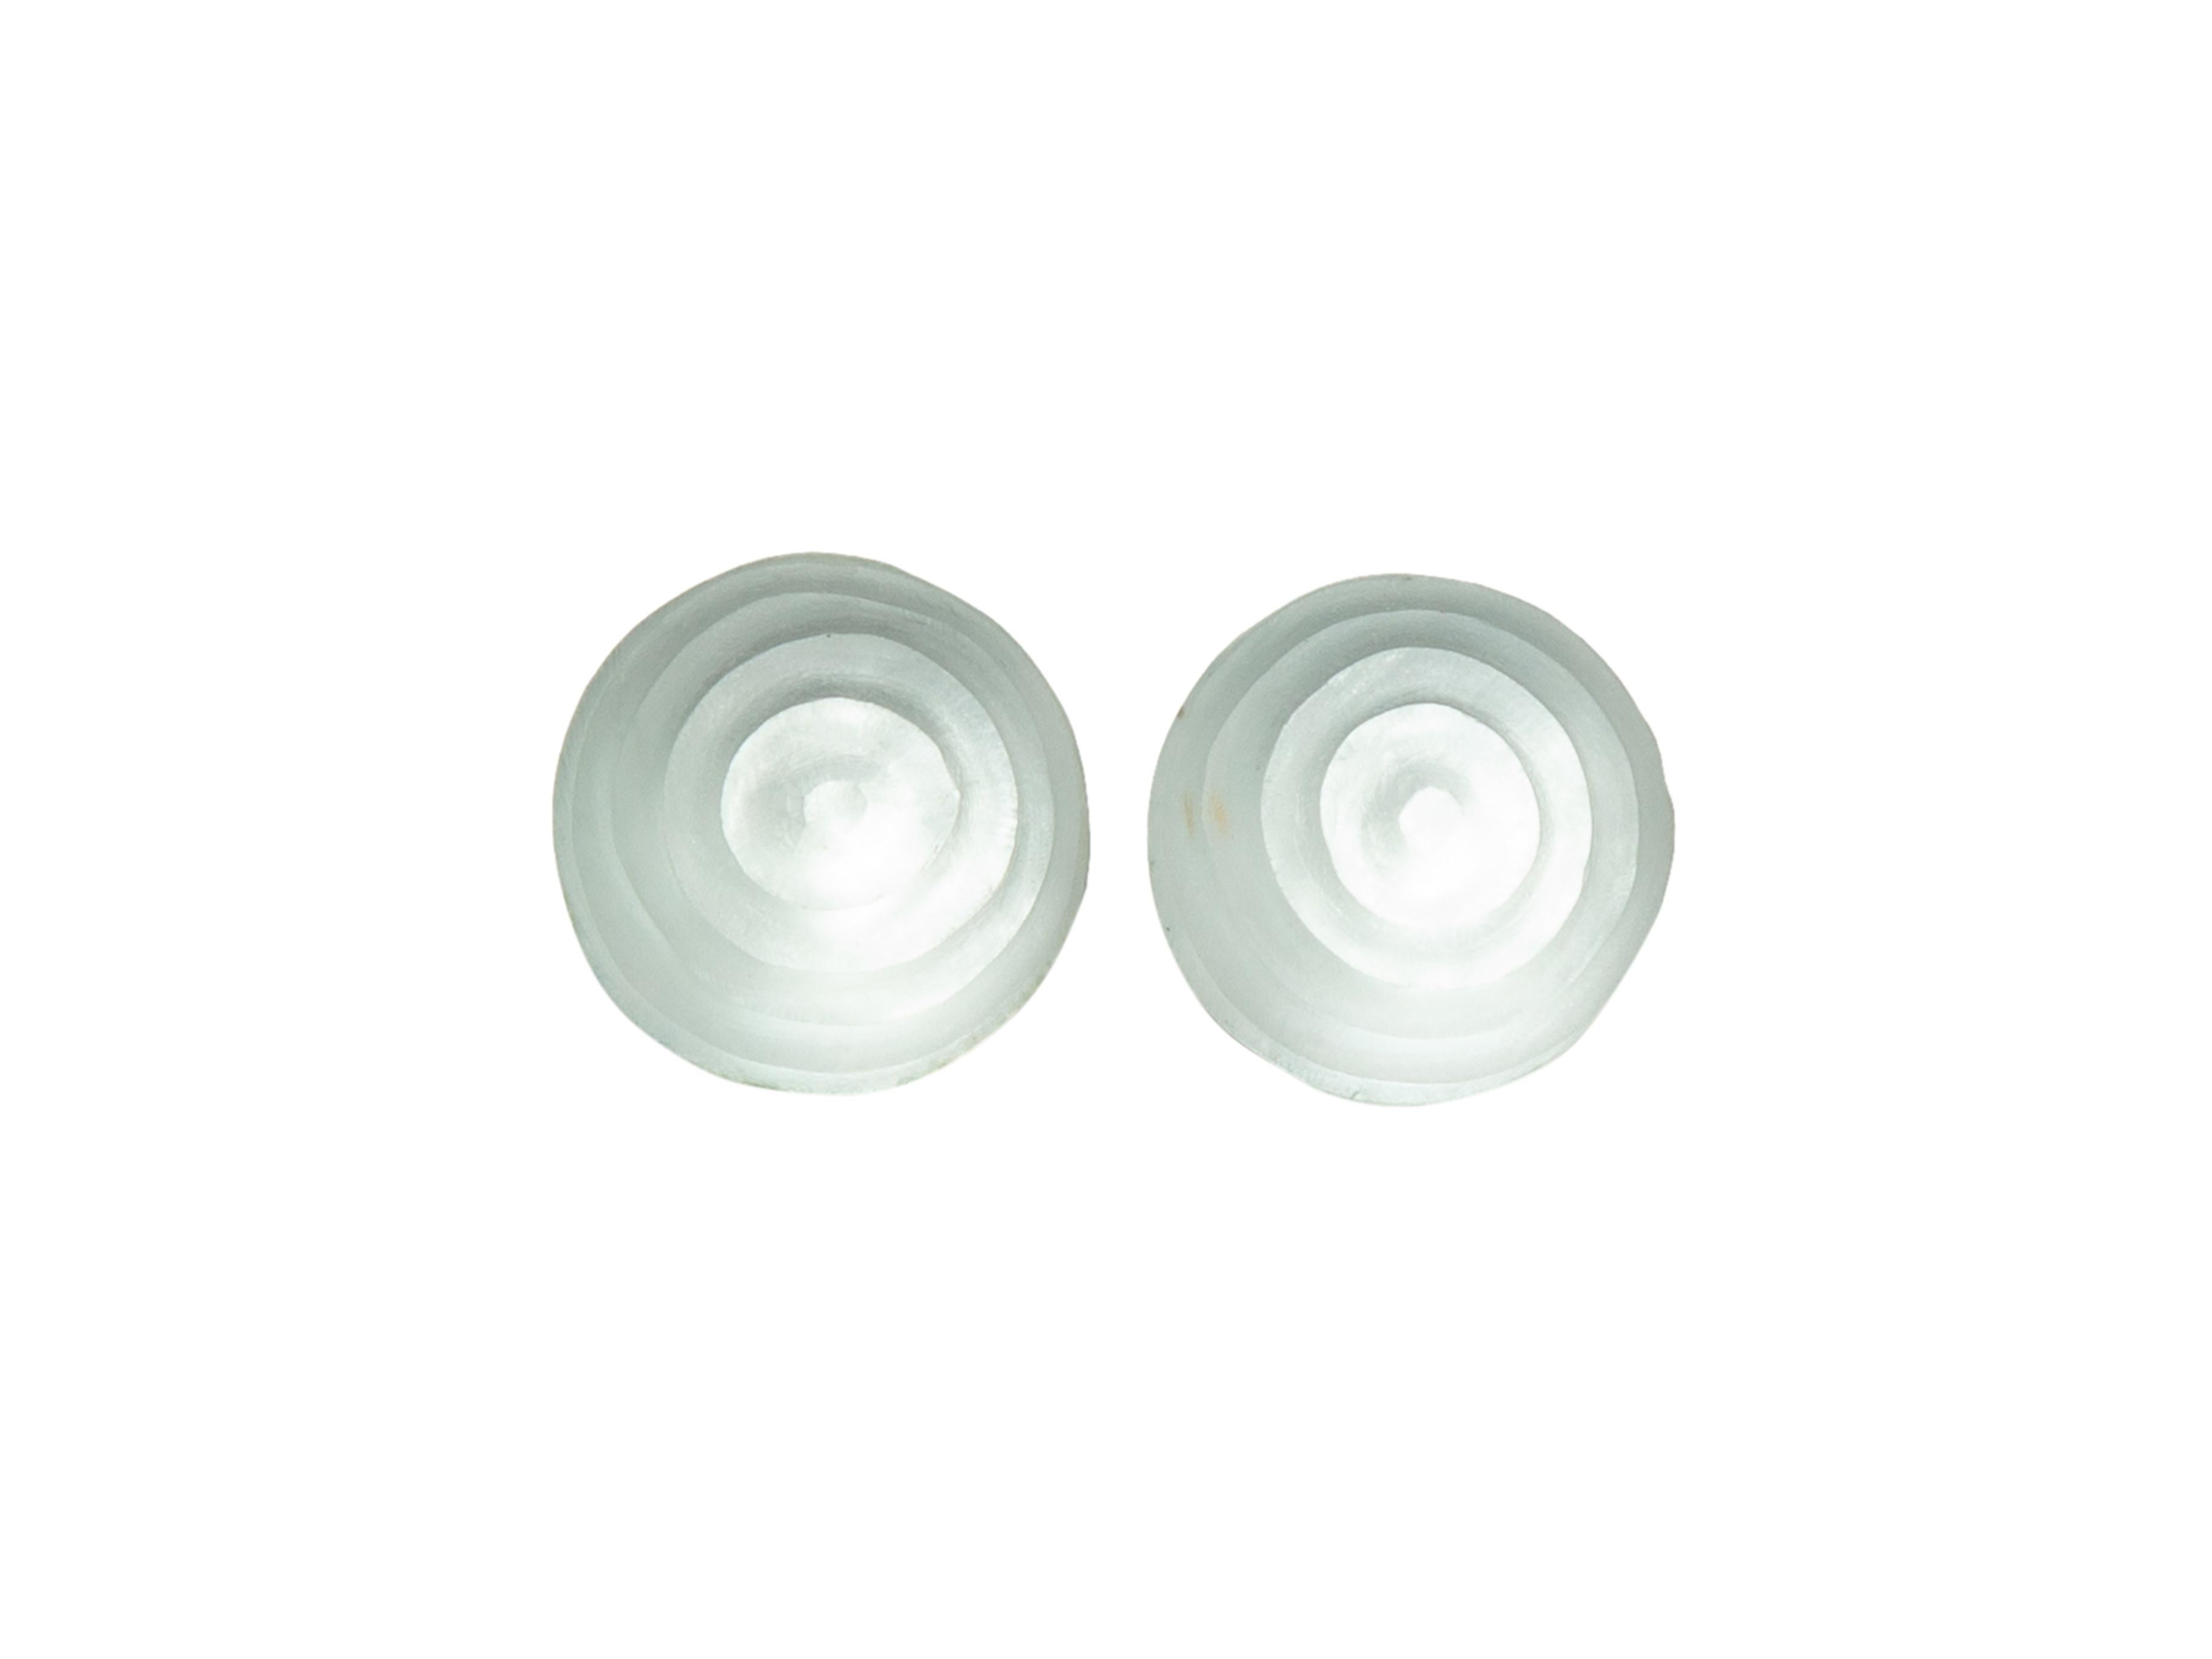 Product details: Light blue swirl clip-on earrings by Alexis Bittar. 0.9